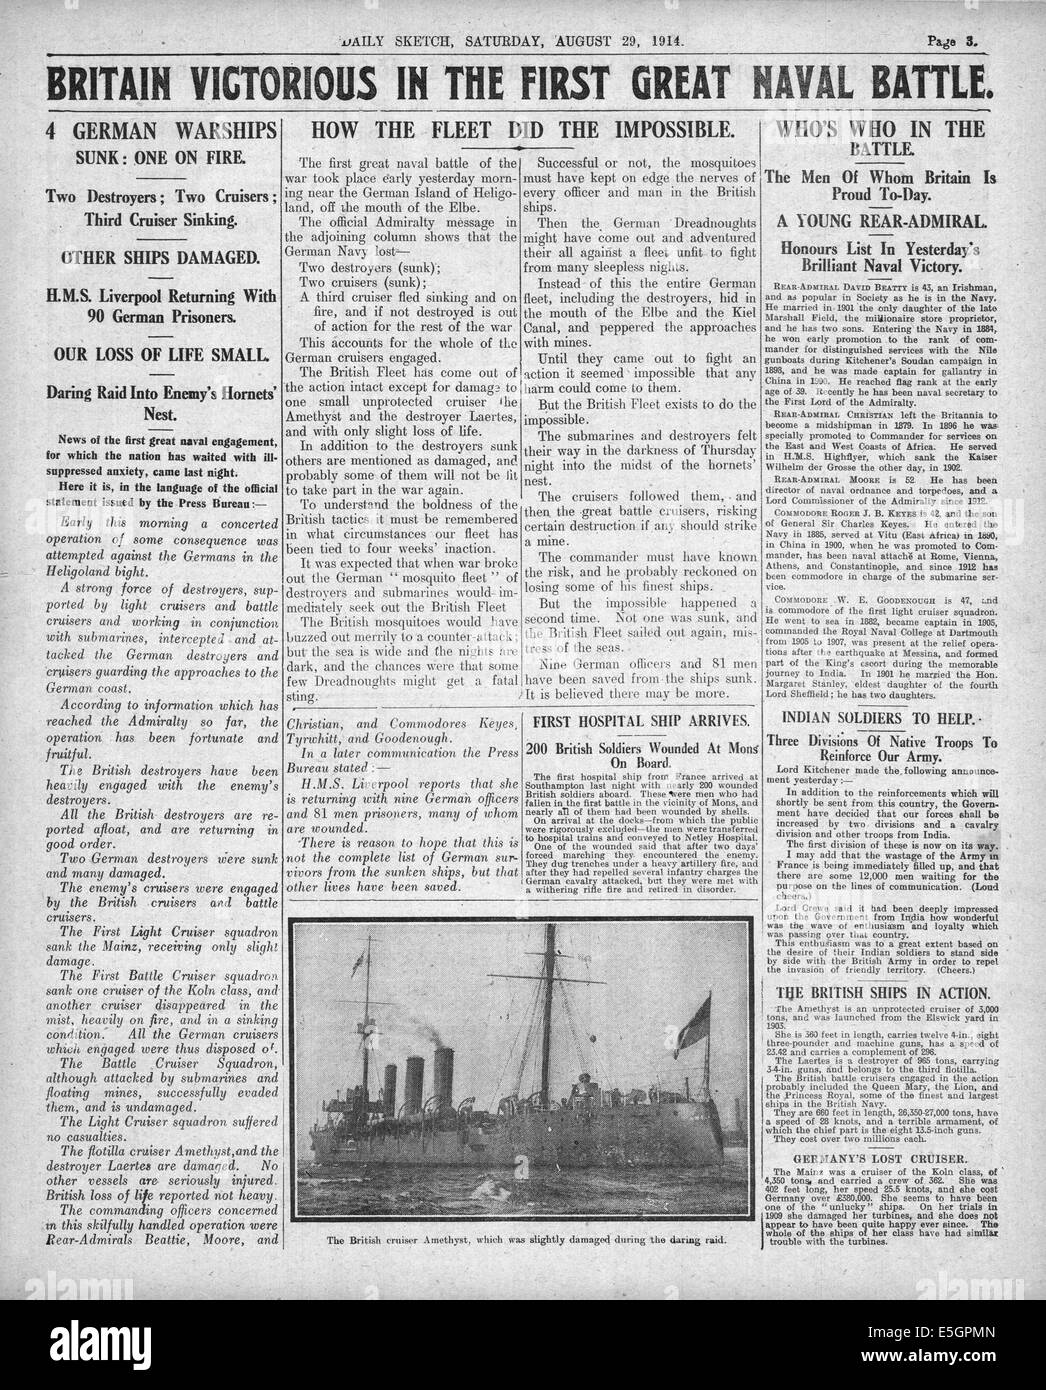 1914 Daily Sketch page 3 reporting the sinking of German warships SMS Mainz, SMS Cöln and SMS Ariadne, destroyer V-187 by the Royal Navy at the Battle of Heligoland Bight Stock Photo